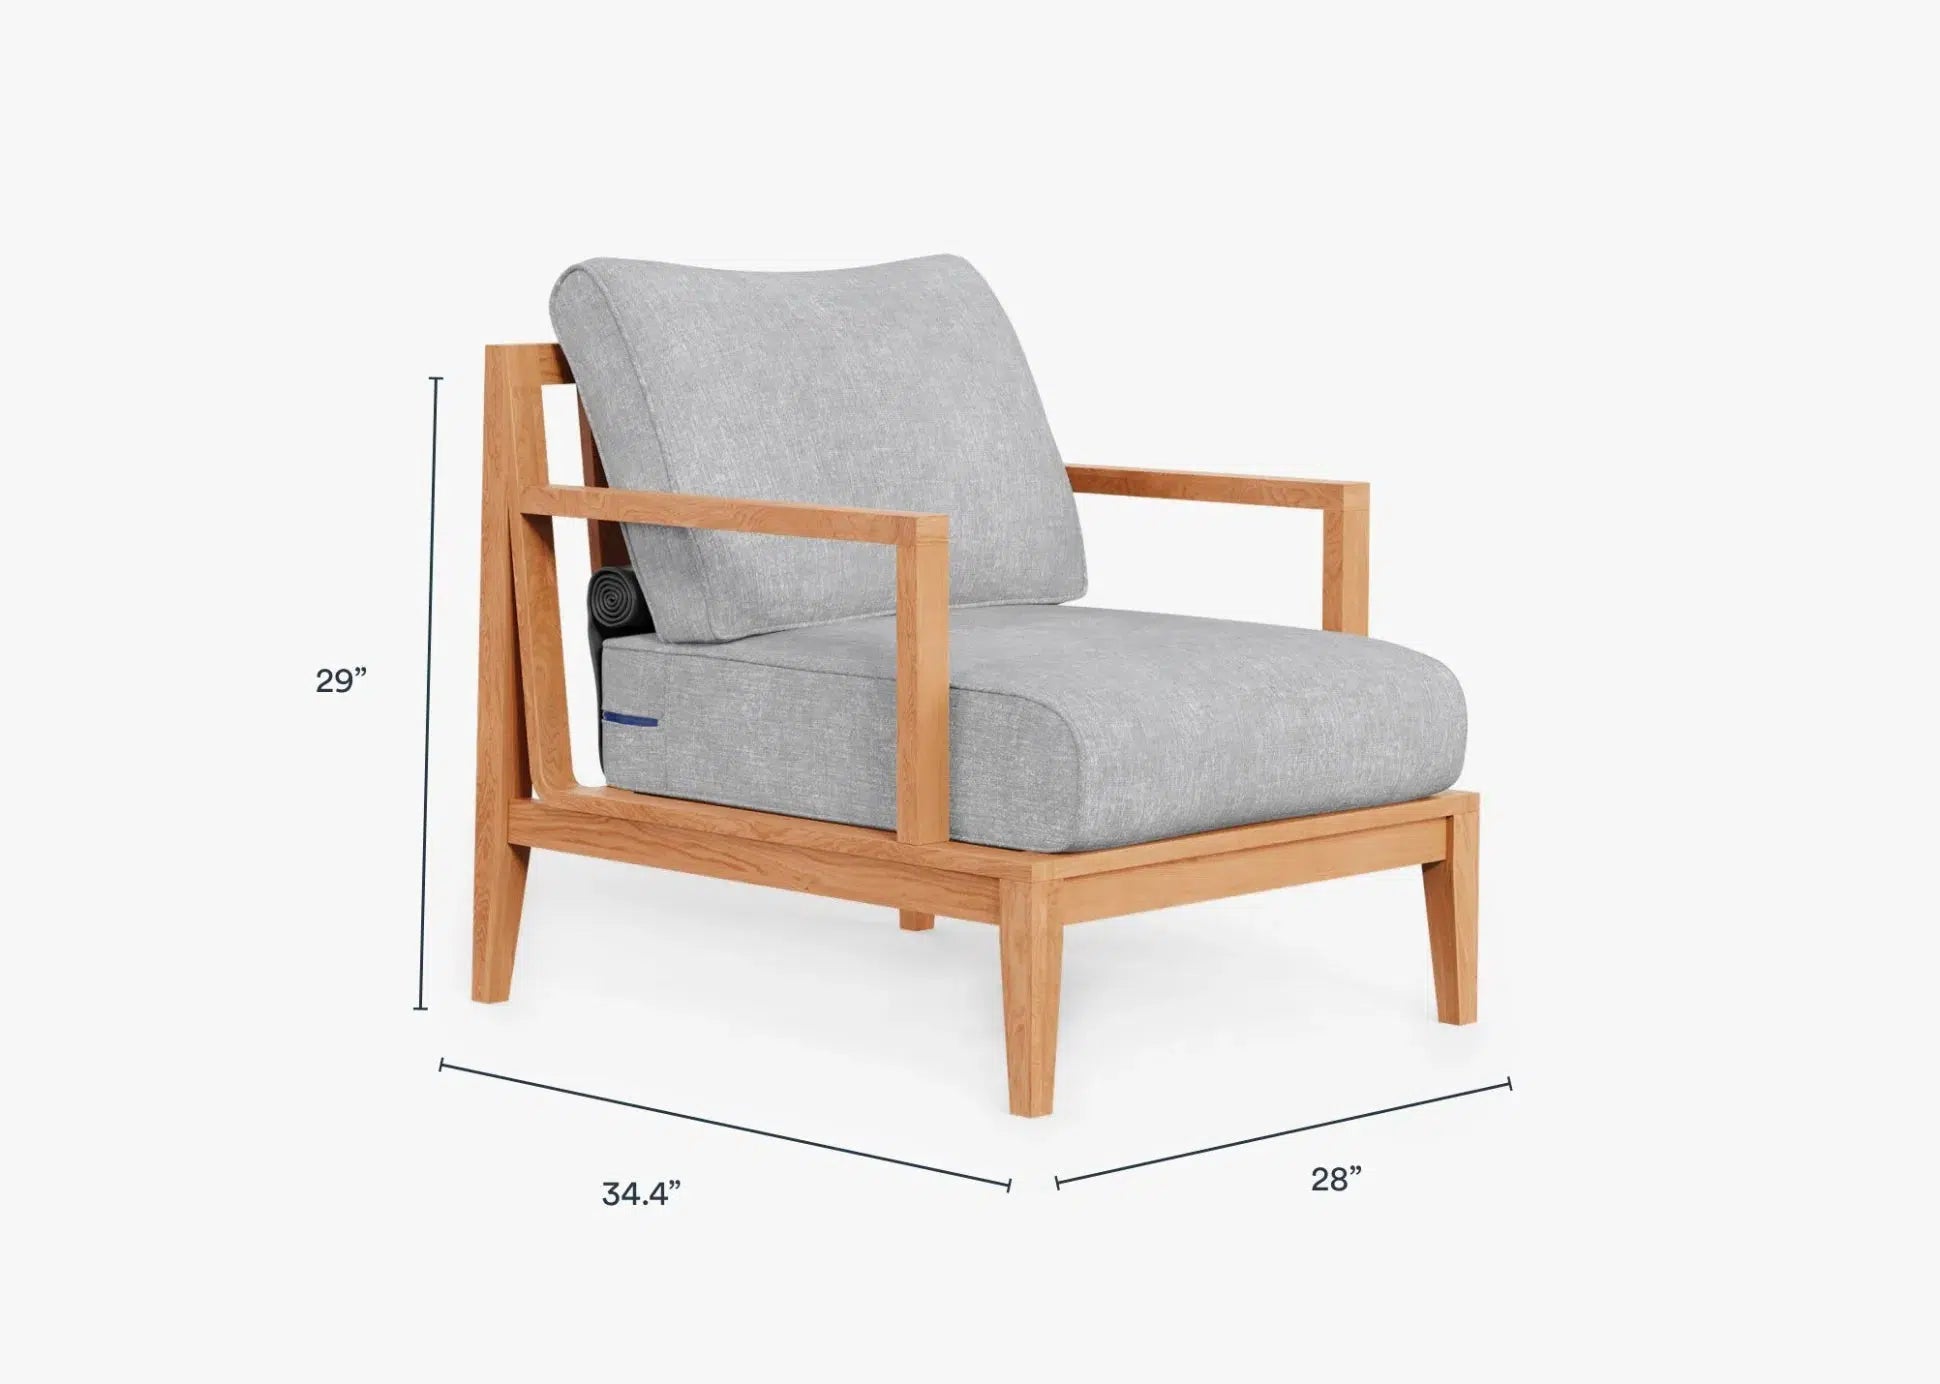 Live Outer 28" Teak Outdoor Armchair With Pacific Fog Gray Cushion